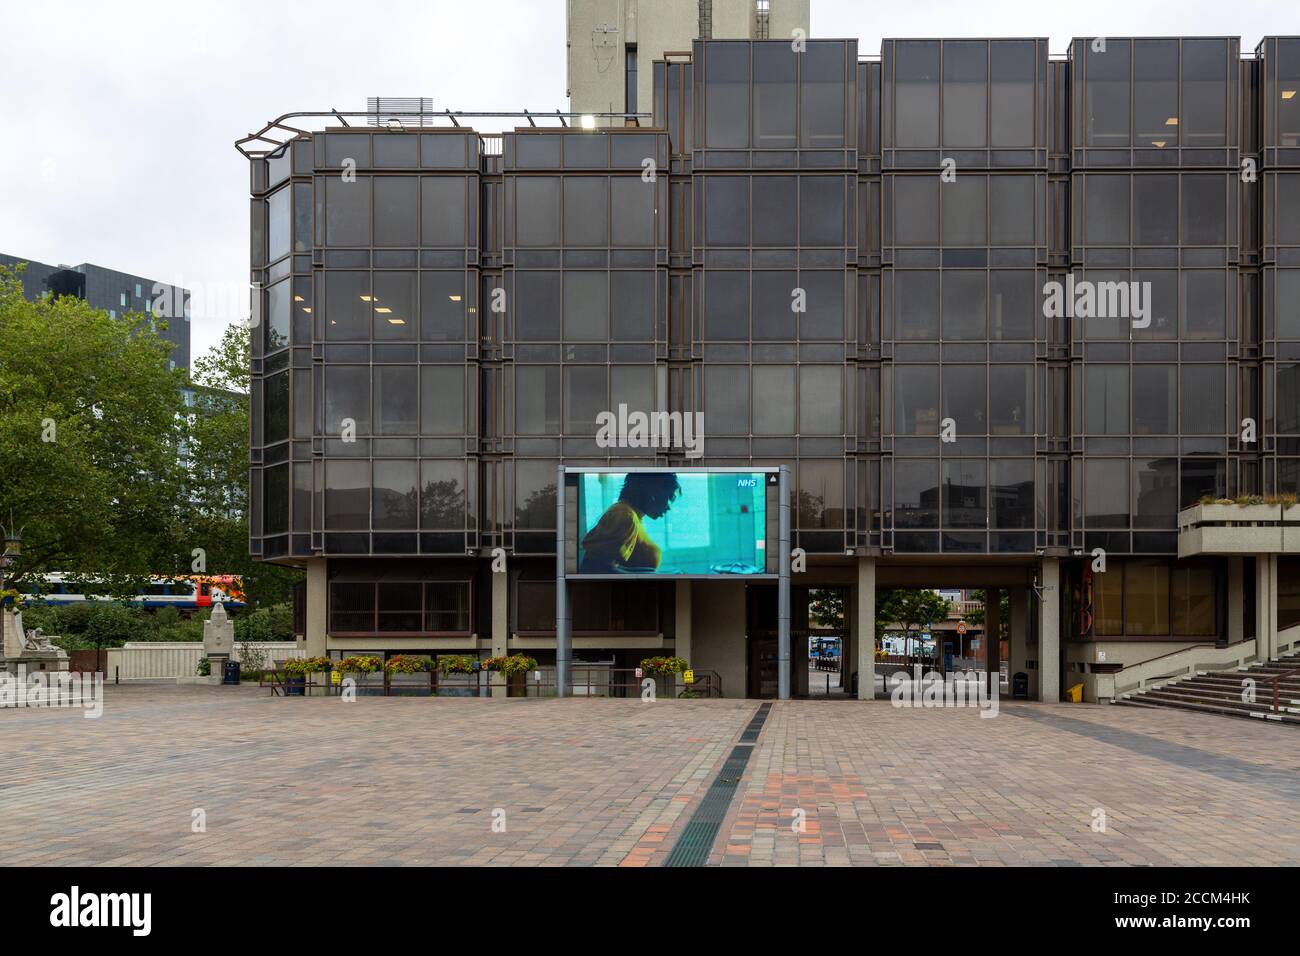 A big screen showing public information in a city centre, Portsmouth Guildhall Stock Photo